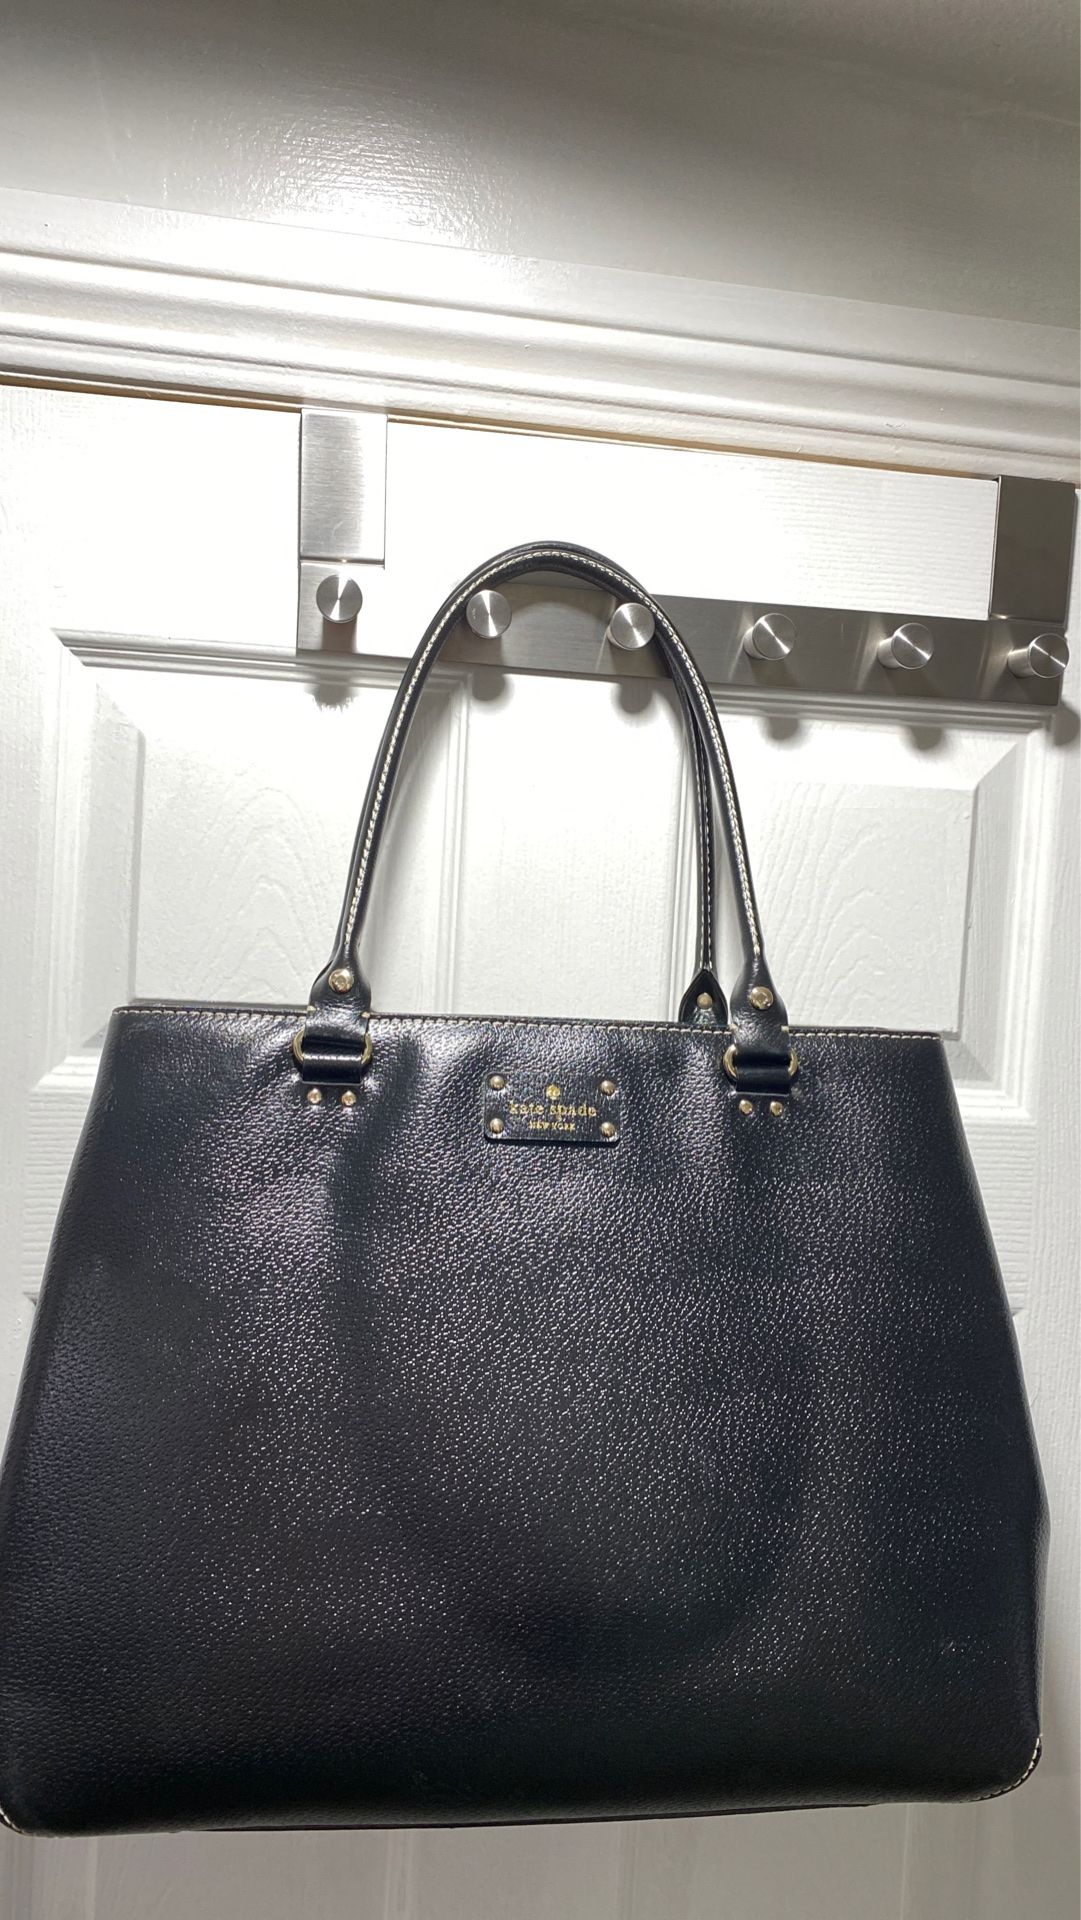 Kate spade large bag. New! Never used.